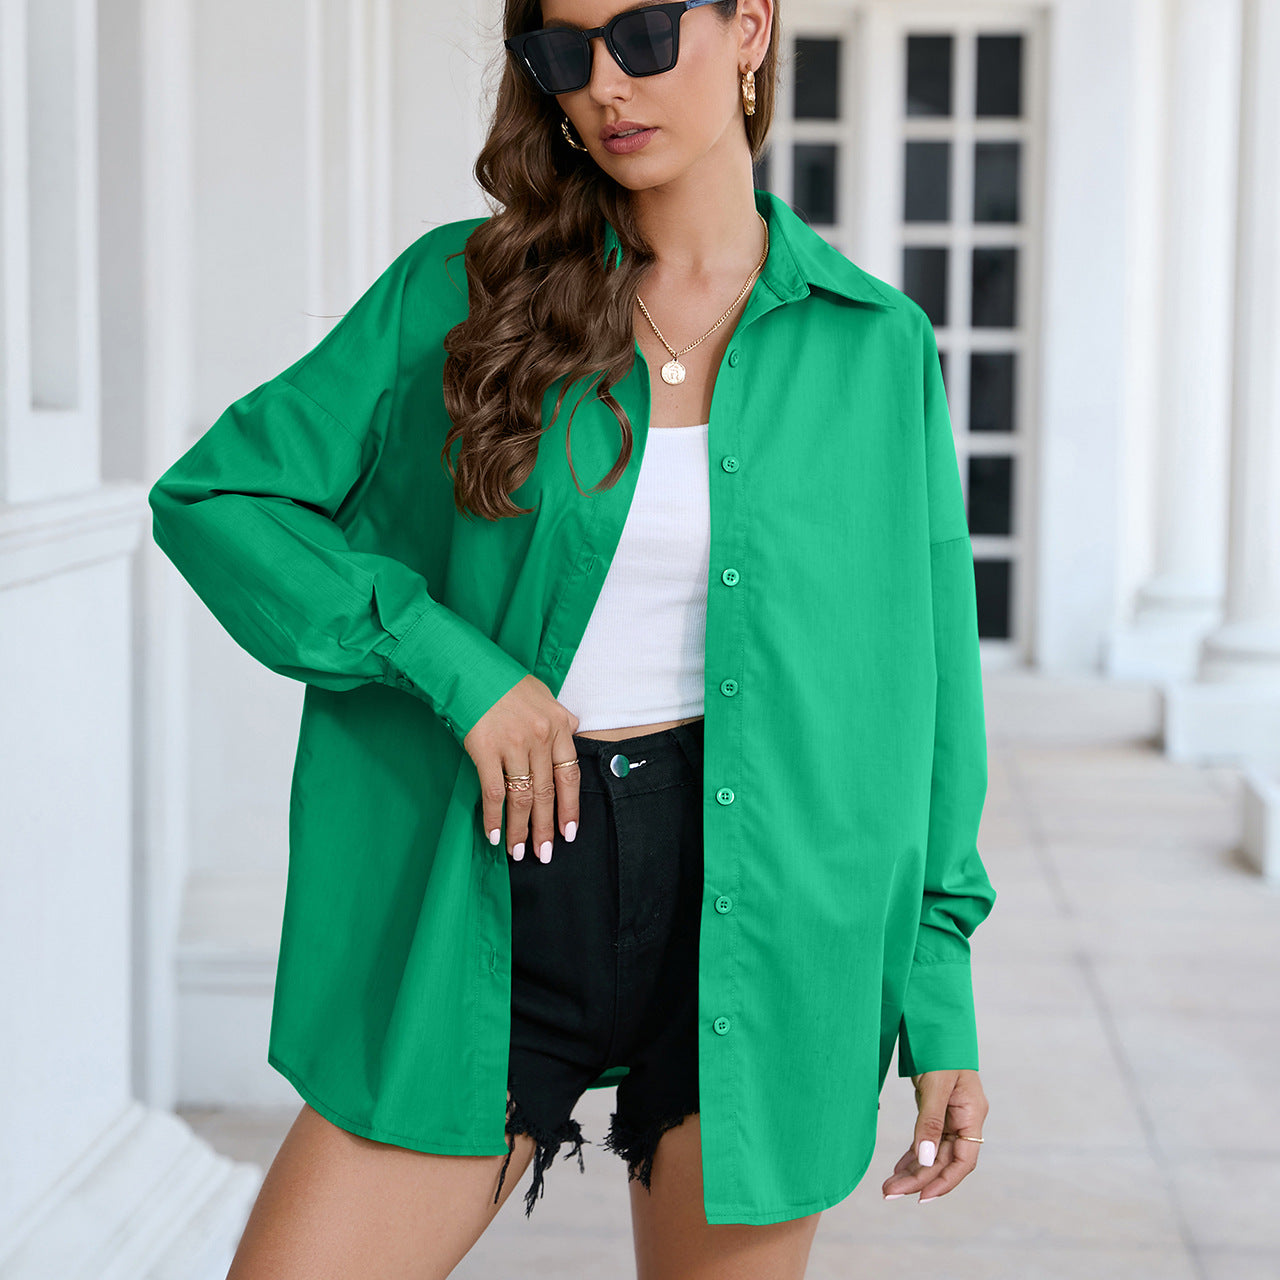 Cotton Solid Color Bright Shirt